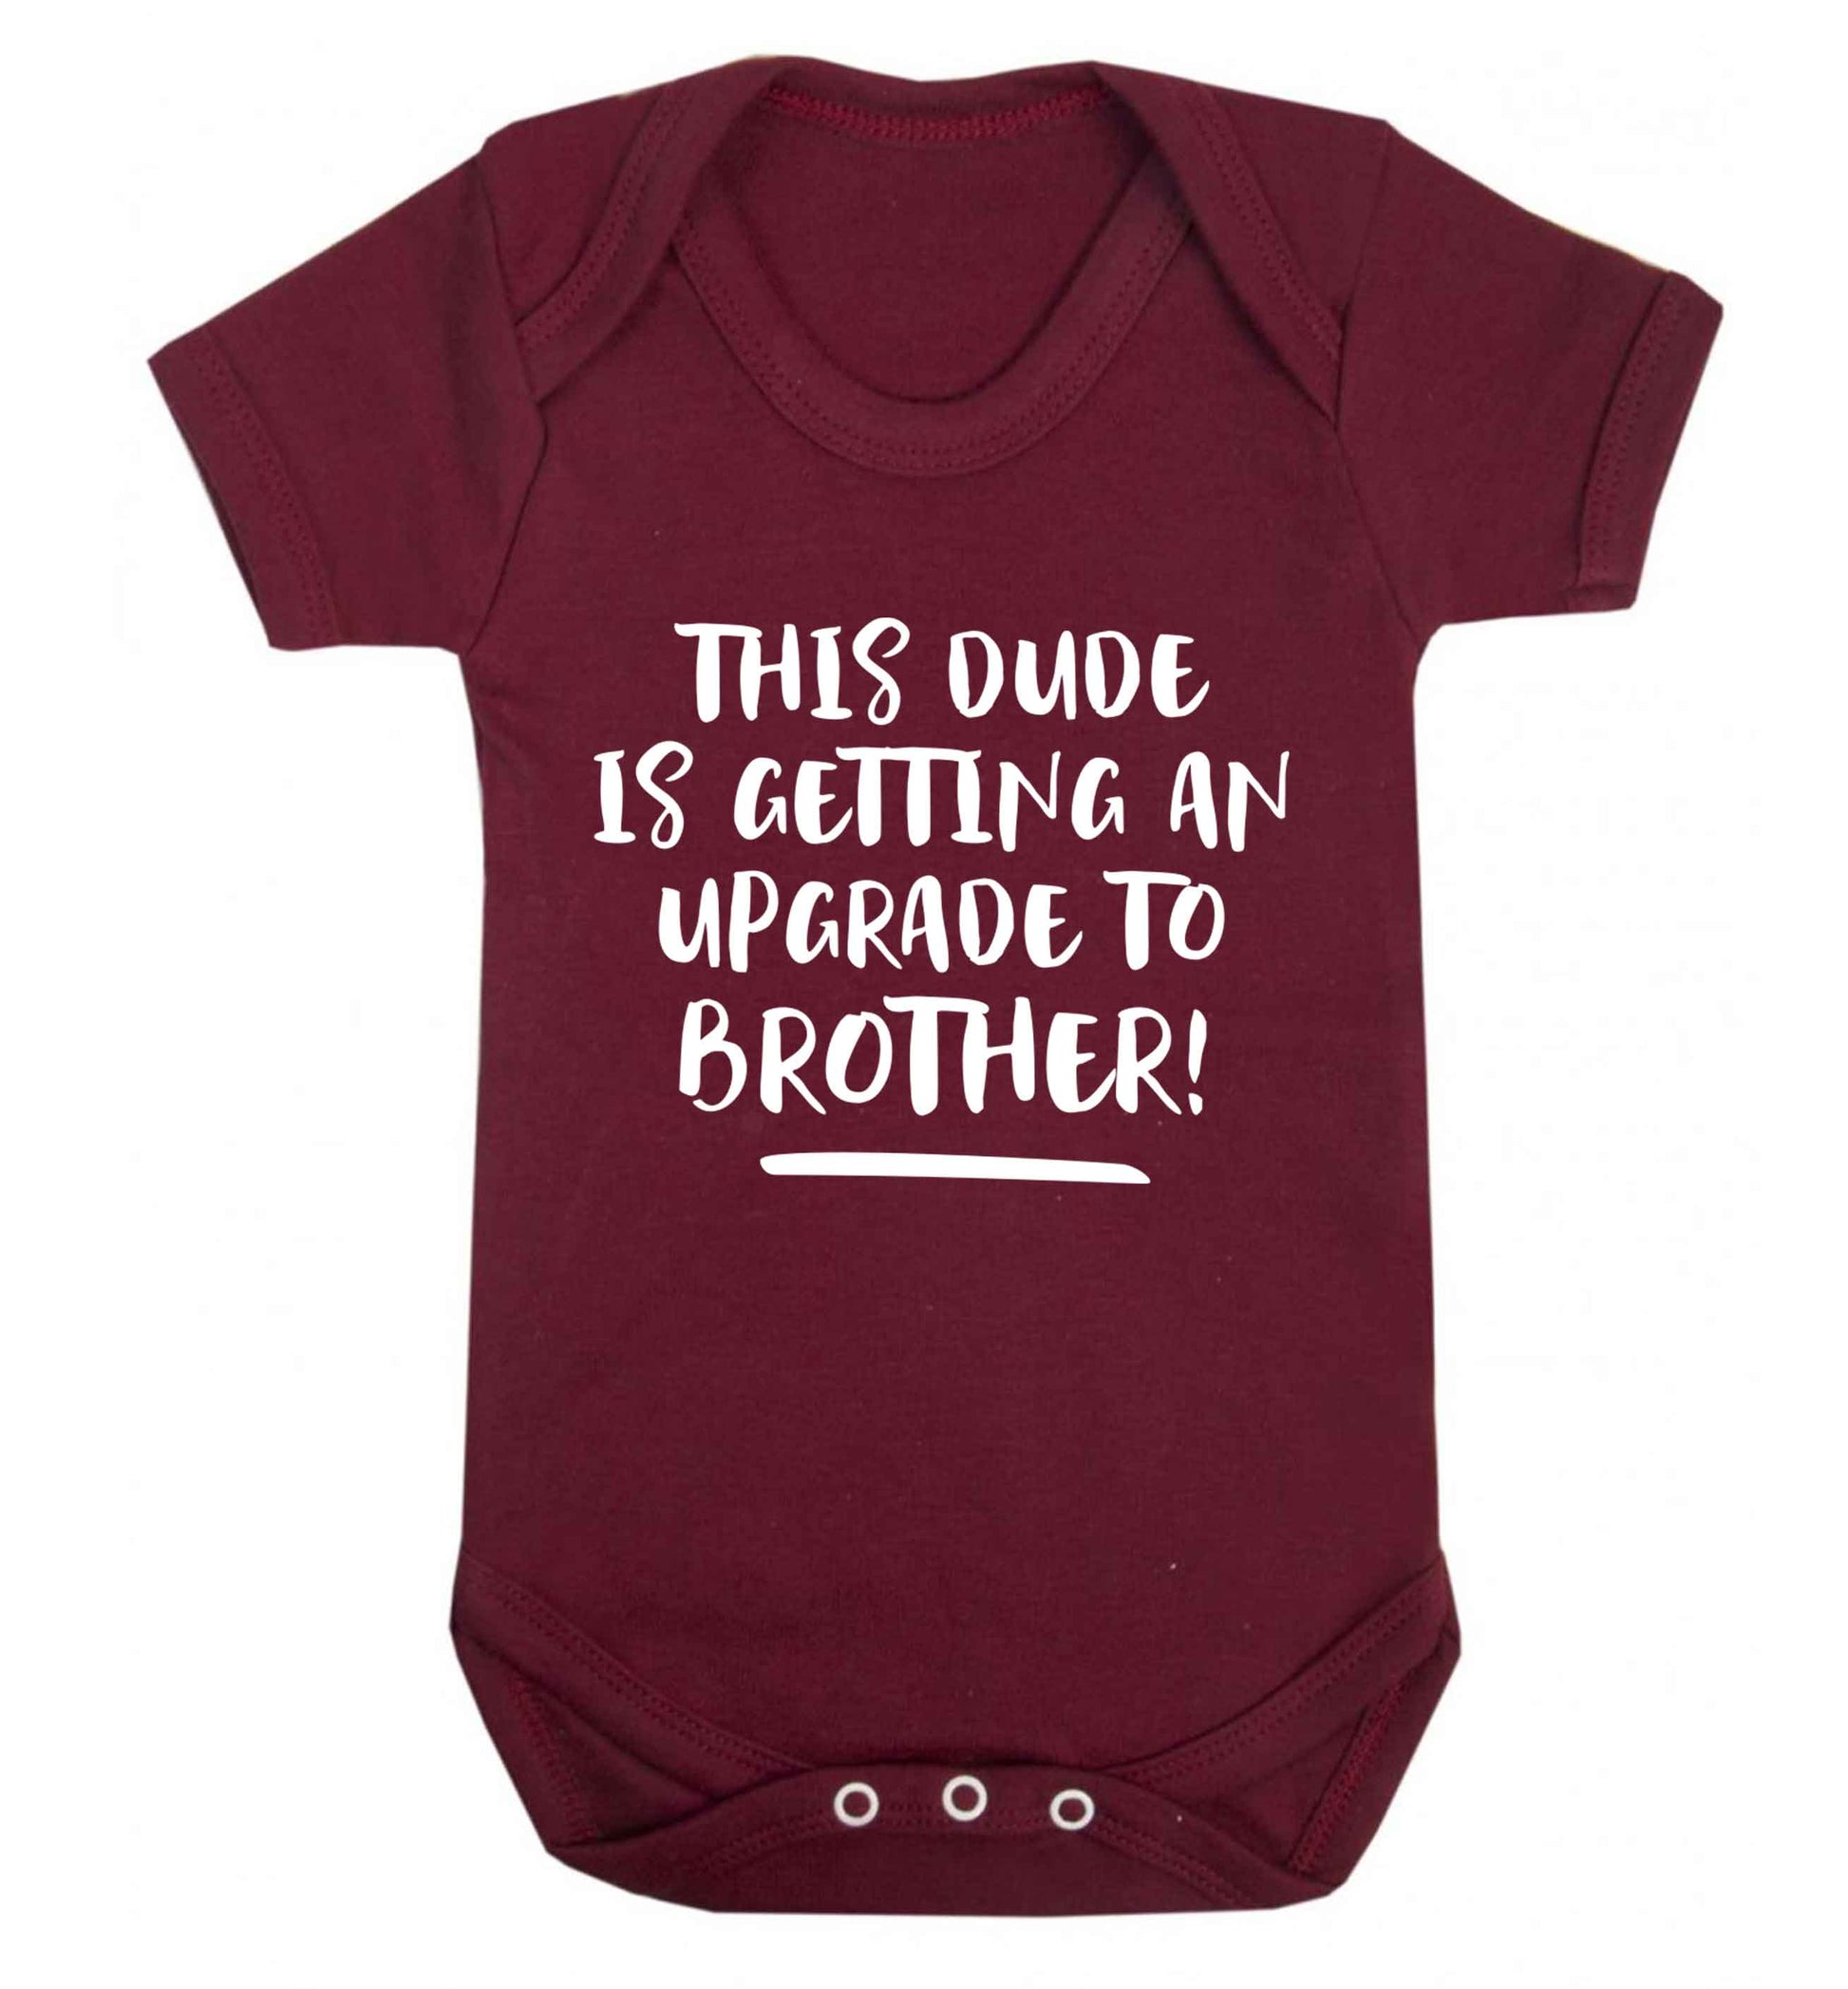 This dude is getting an upgrade to brother! Baby Vest maroon 18-24 months